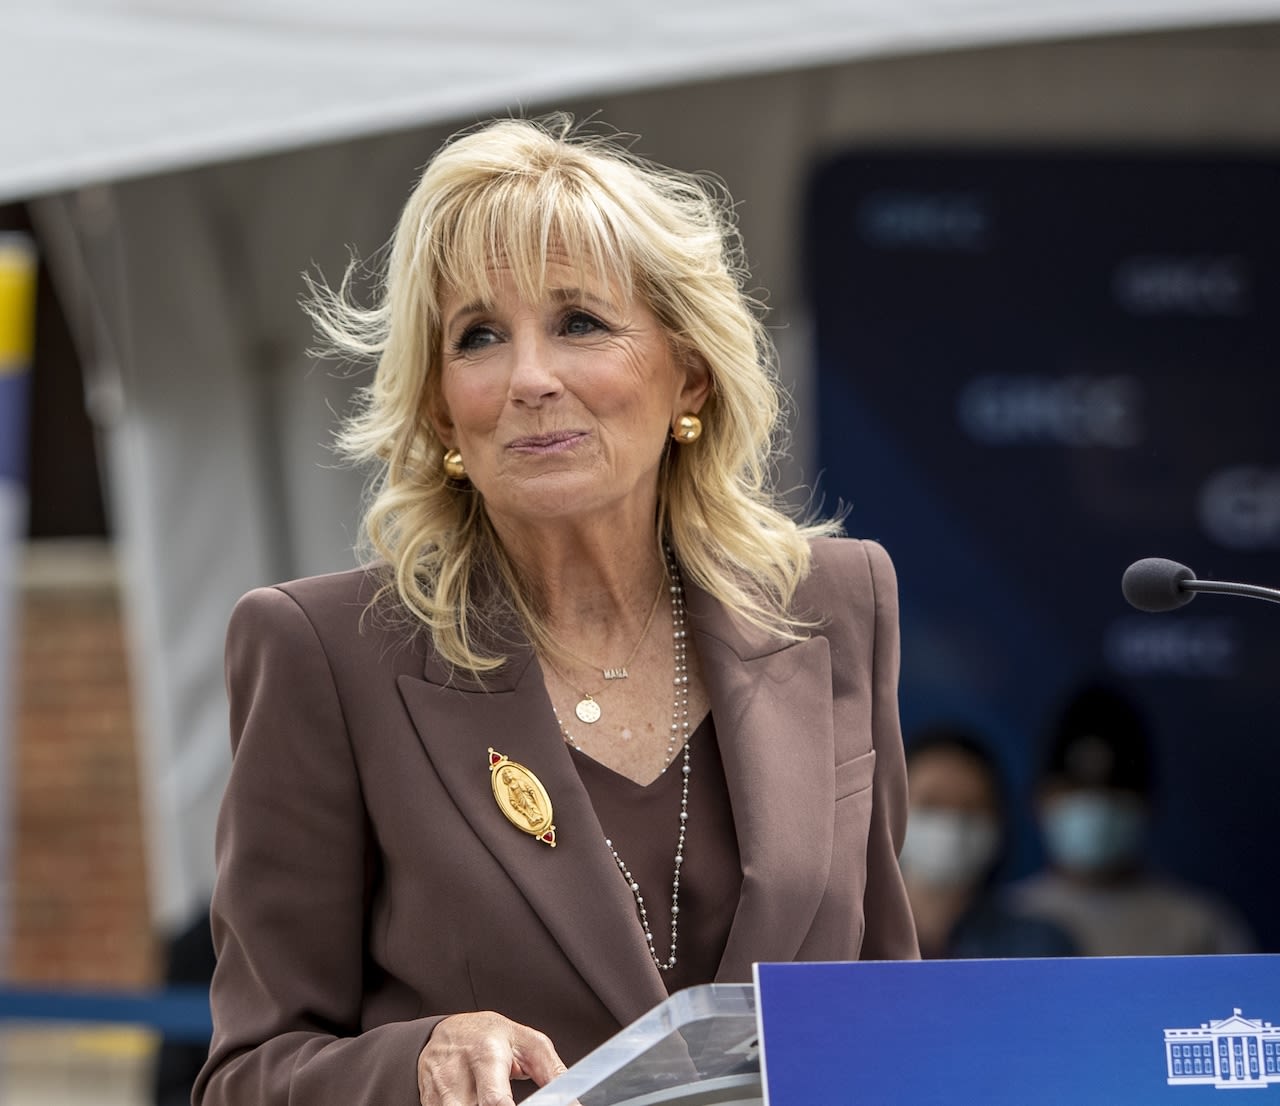 First lady Jill Biden cancels Ann Arbor campaign stop as speculation swirls